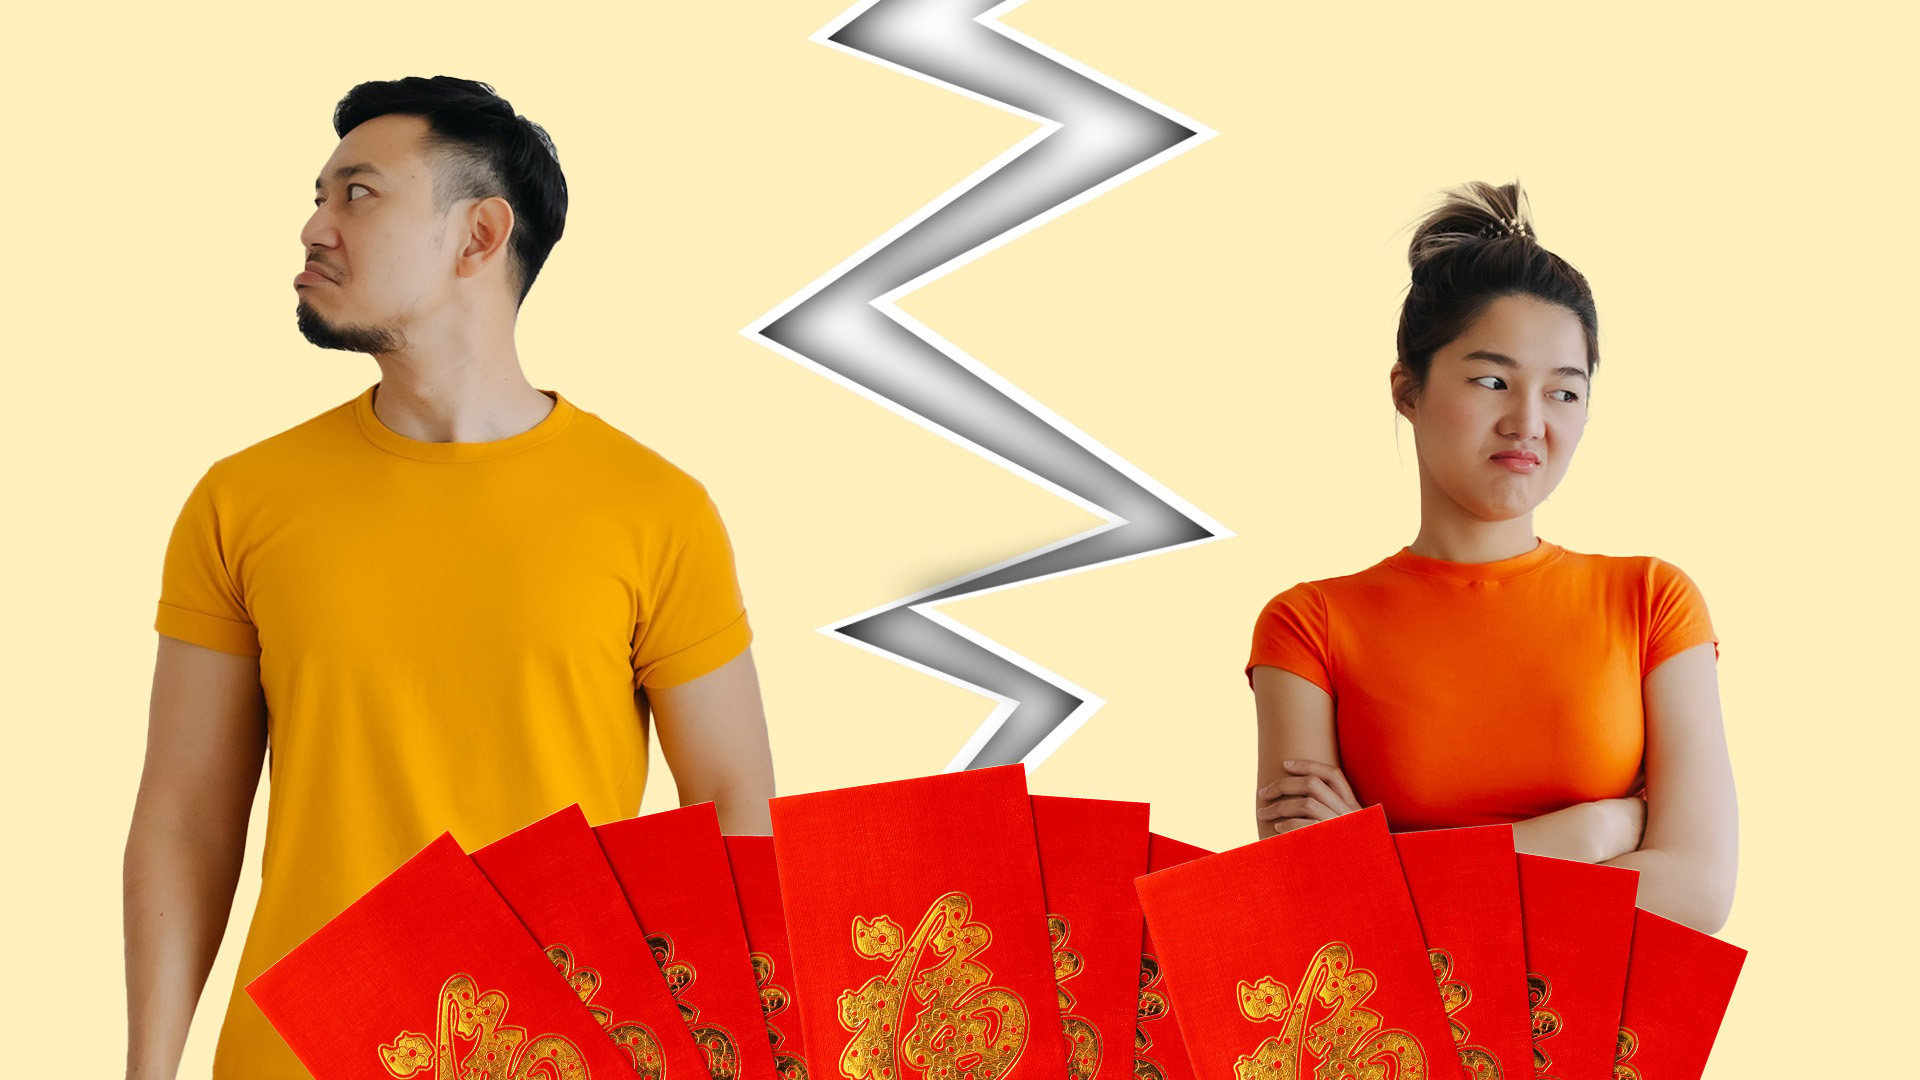 A father in China has sparked anger on mainland social media after he launched a failed legal bid to grab half of his children’s US$36,000 Lunar New Year lucky money during a divorce battle. Photo: SCMP composite/Shutterstock